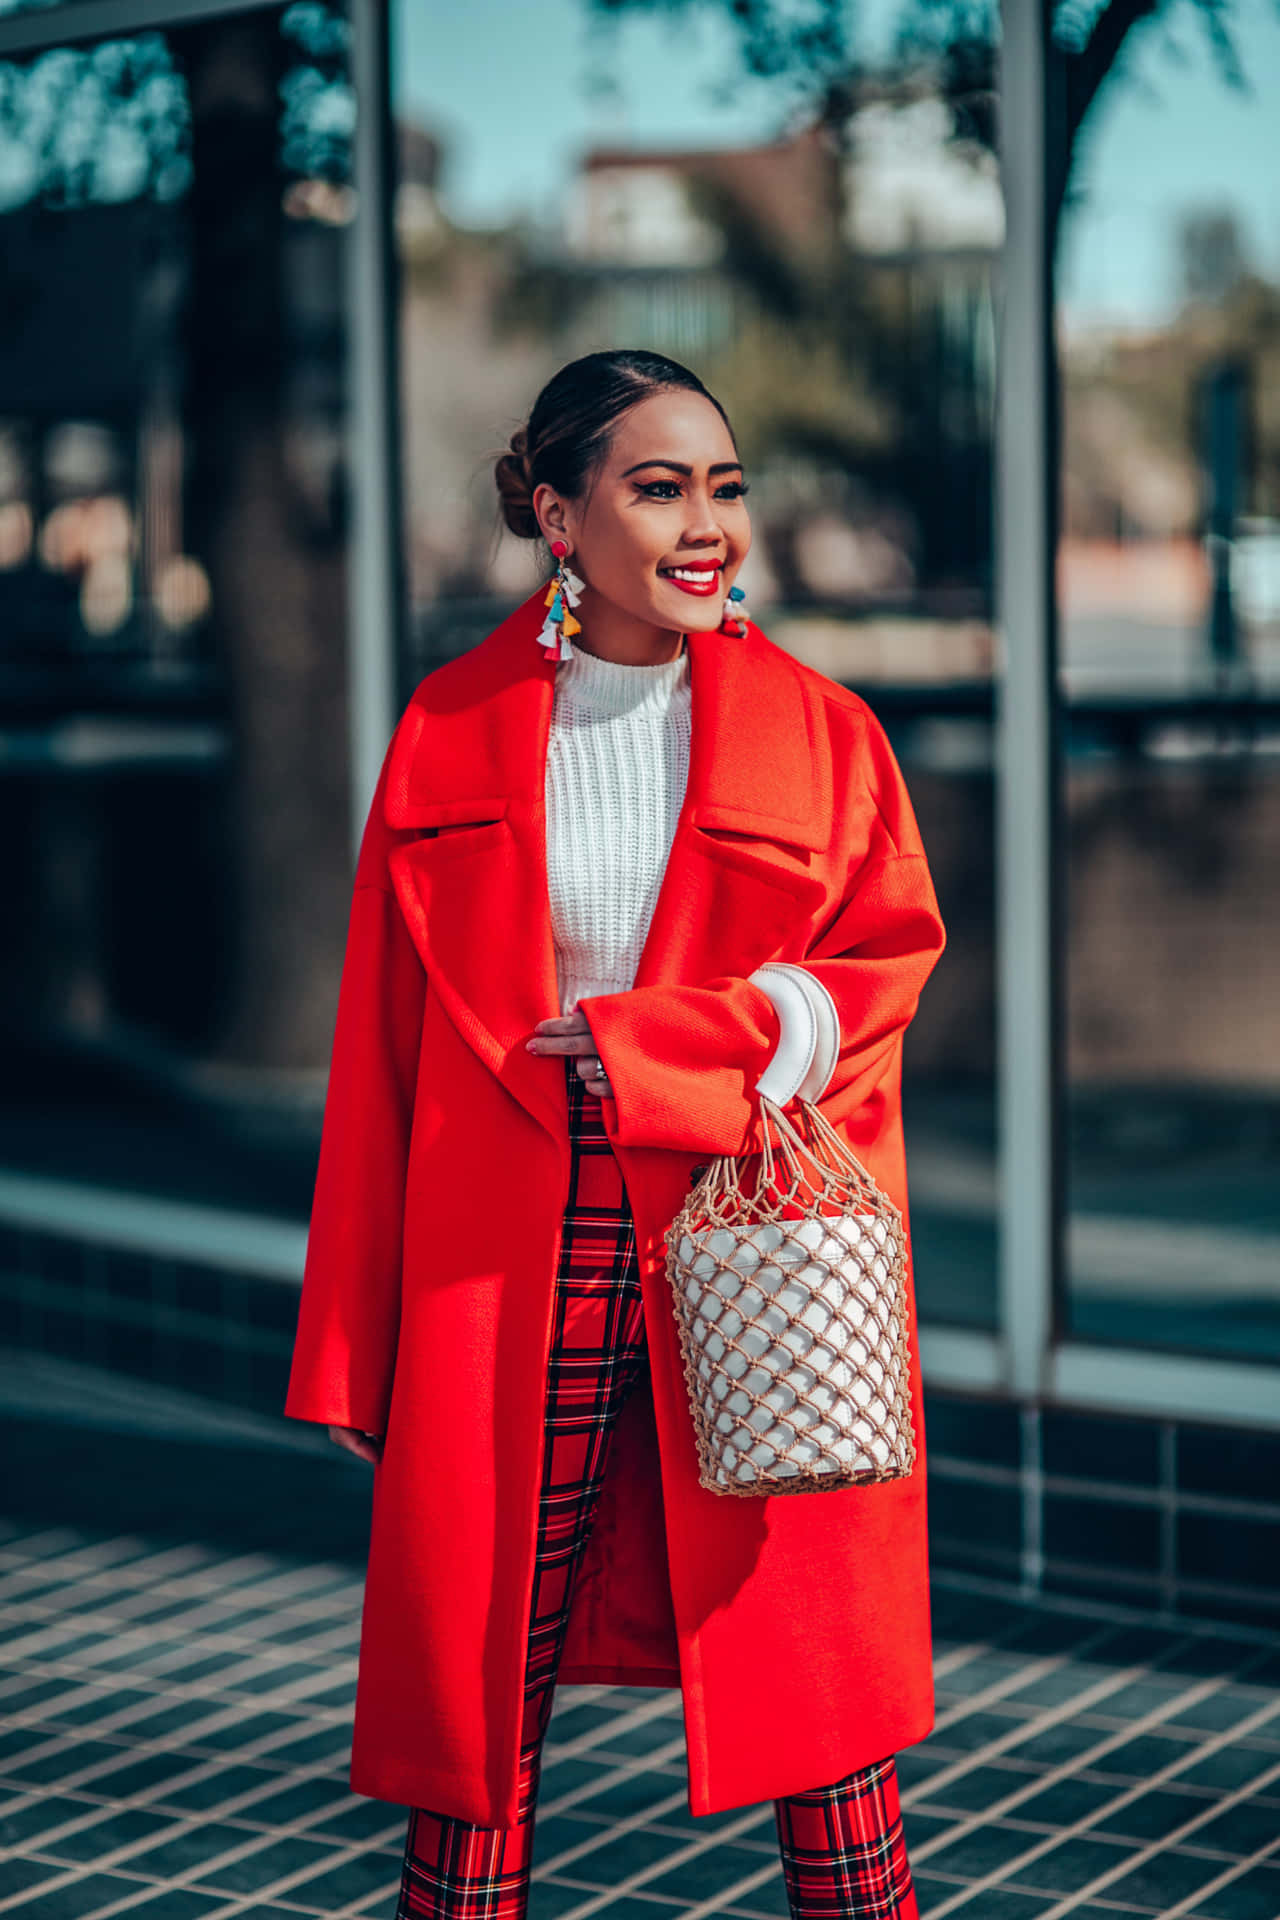 Elegance in Red - Chic Woman Wearing a Stylish Red Coat Wallpaper